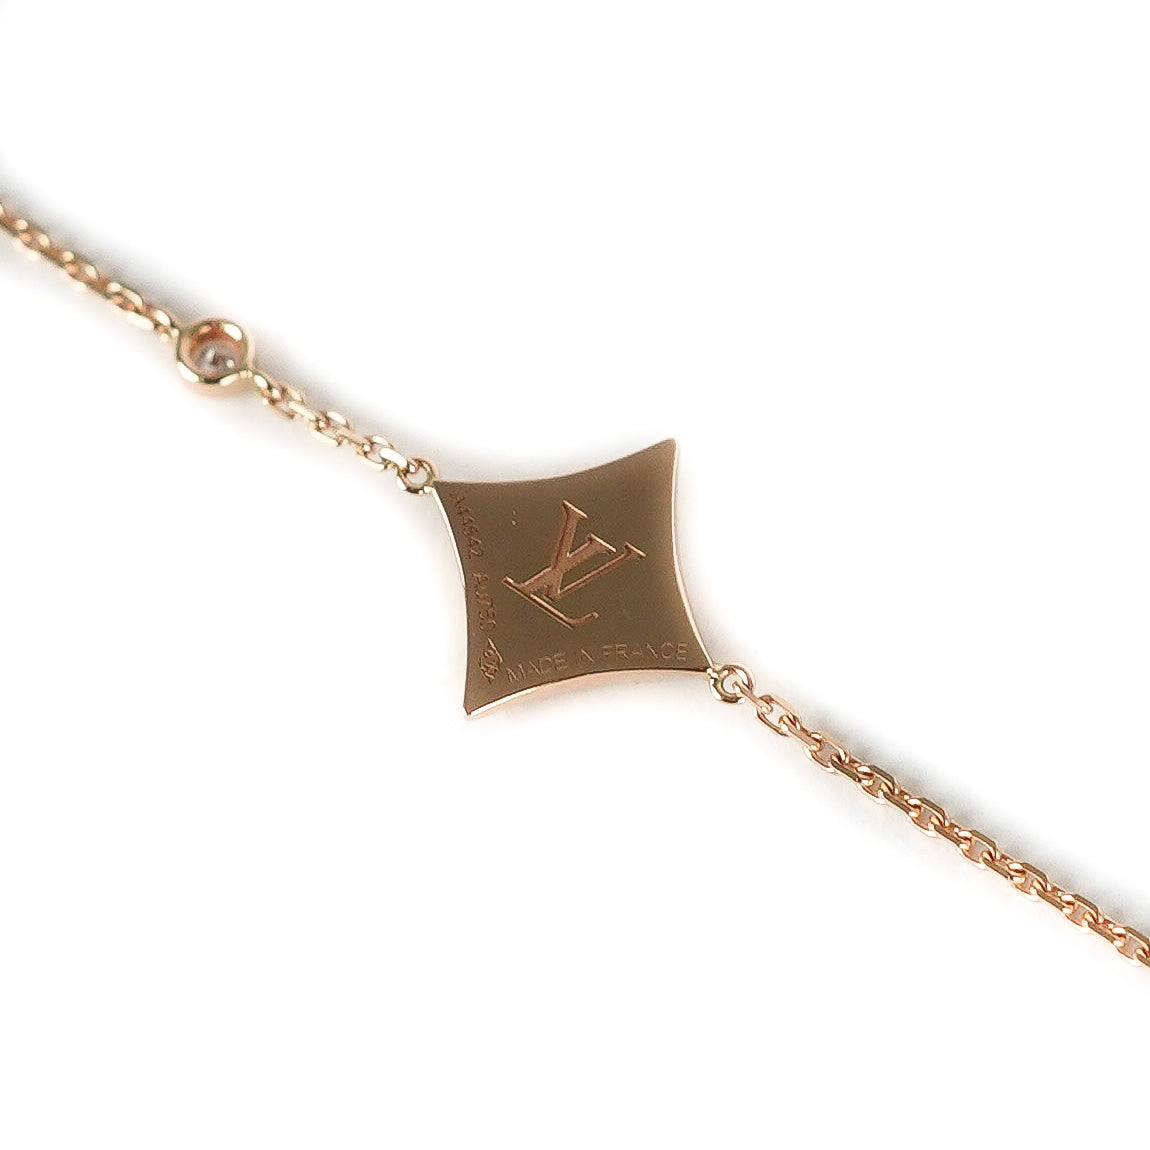 Louis Vuitton Color Blossom Star Bracelet Mother-of-Pearl Pink Gold and  White at 1stDibs  lv color blossom bracelet, louis vuitton color blossom  bracelet, louis vuitton star bracelet